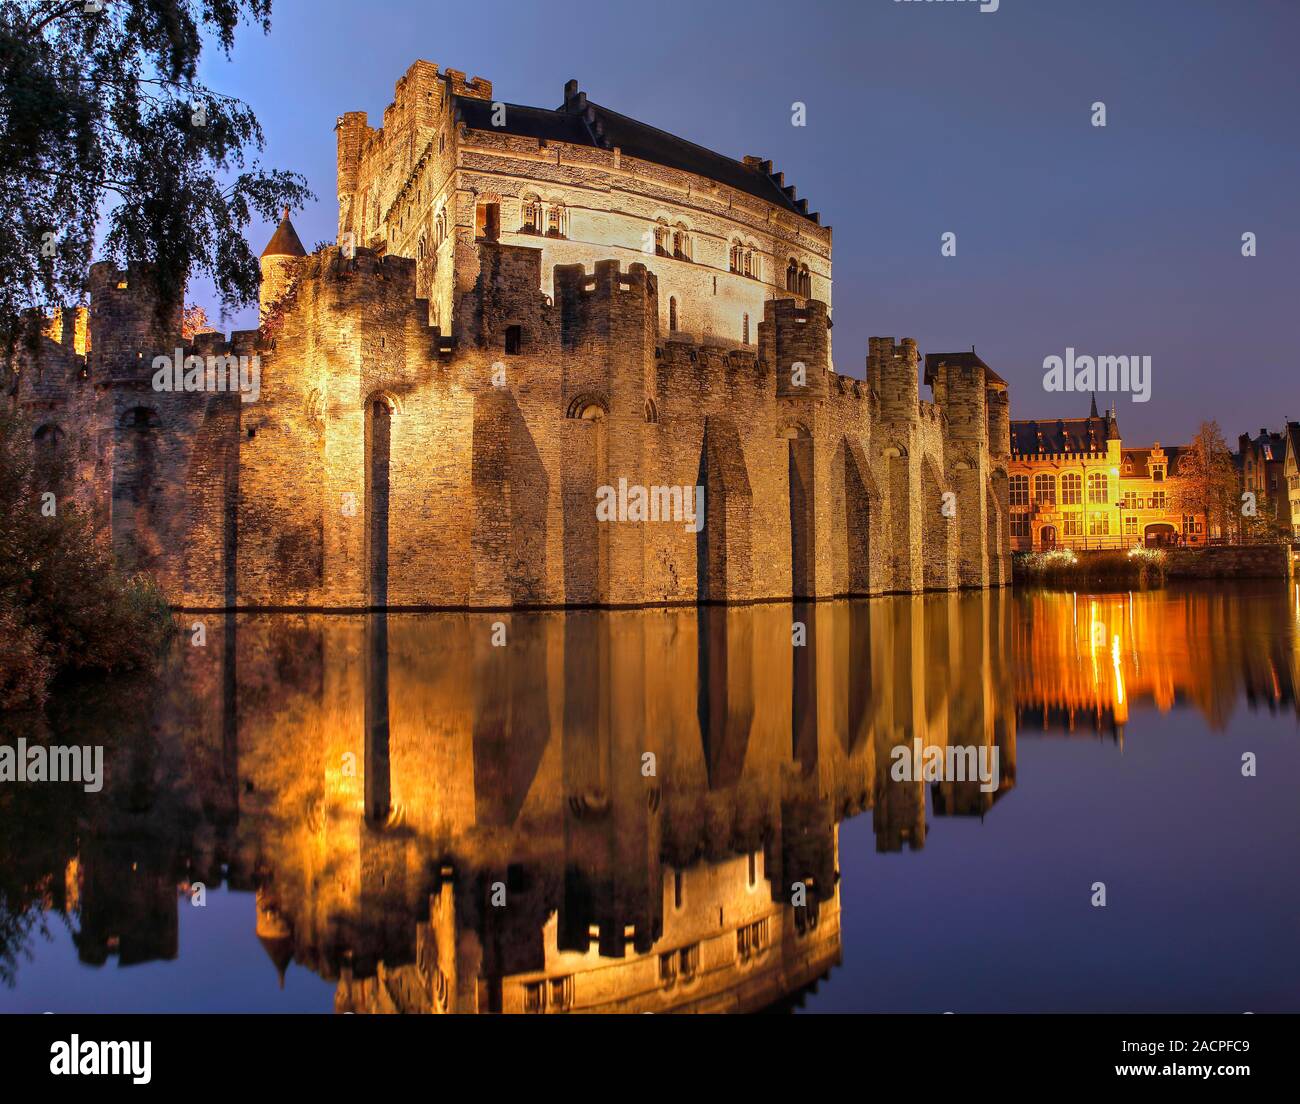 Illuminated castle Gravensteen at dusk with water reflection, moated castle, Ghent, Flanders, Belgium Stock Photo